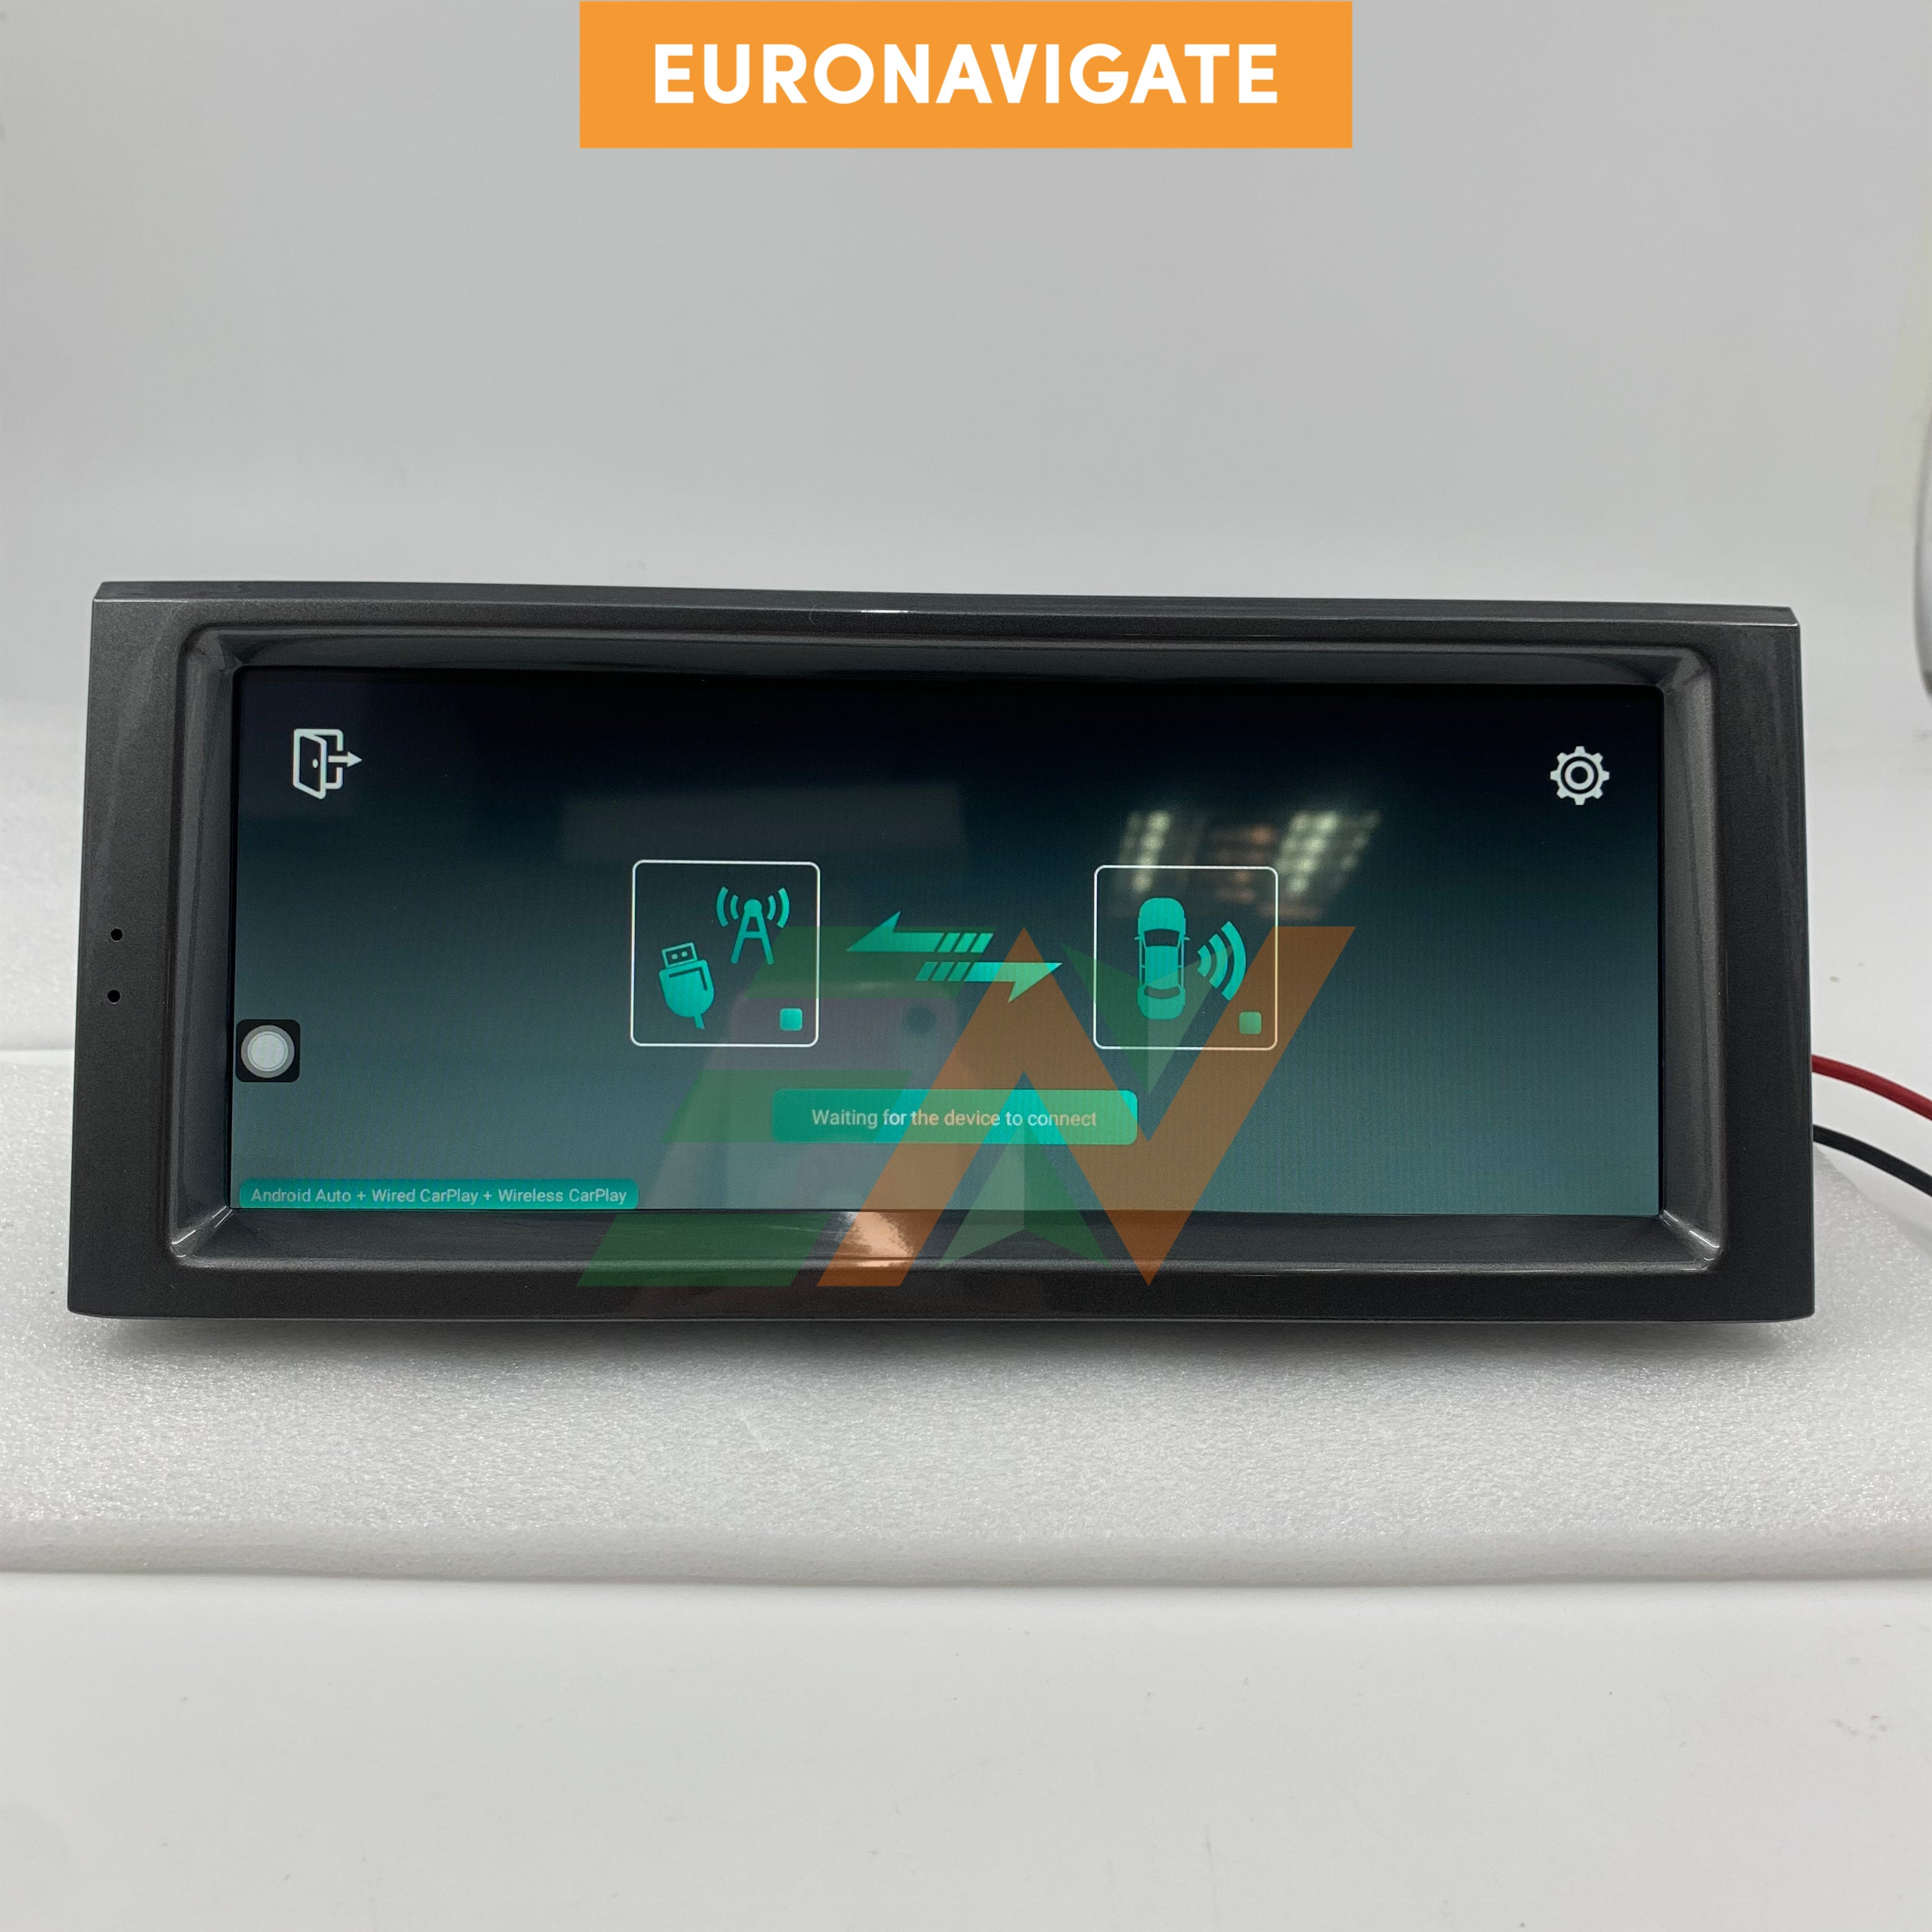 Upgrade your Range Rover Vogue L322 with Euronavigate's Android 10.25" touchscreen. Features include GPS, multimedia, Apple Carplay, wireless receiver, hands-free, plug-and-play retrofit accessories.